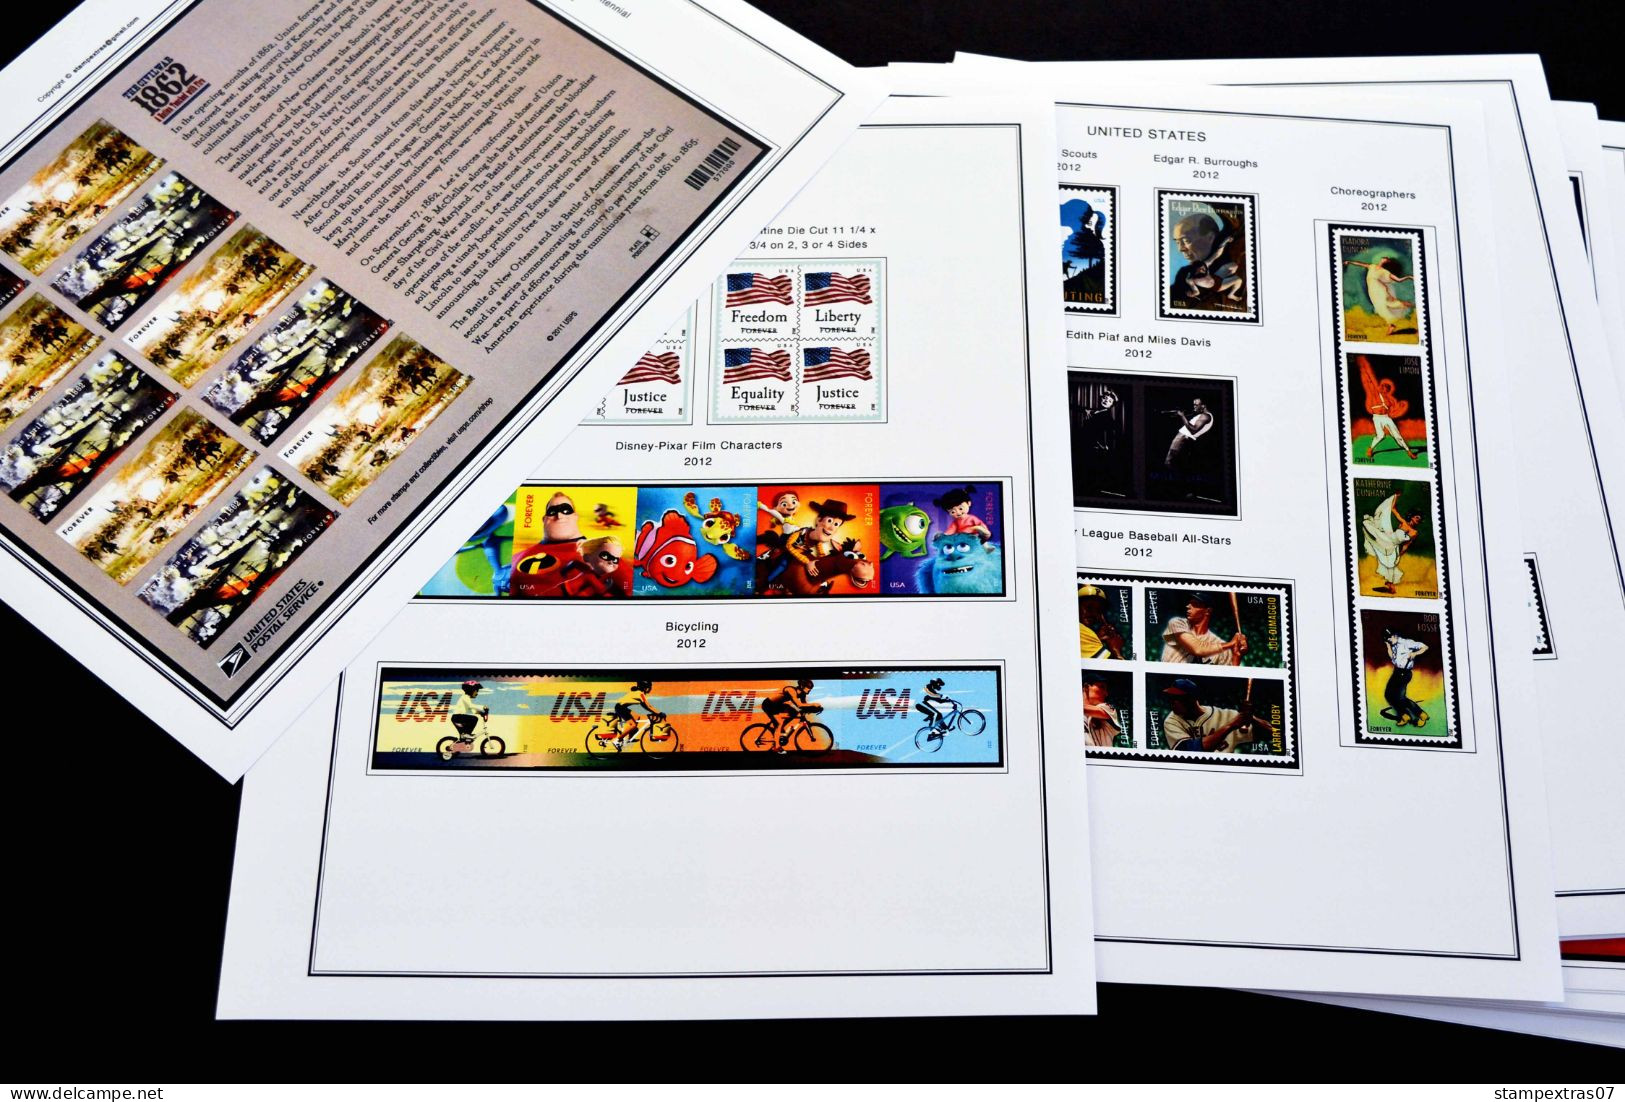 COLOR PRINTED USA 2011-2020 STAMP ALBUM PAGES (101 illustrated pages) >> FEUILLES ALBUM